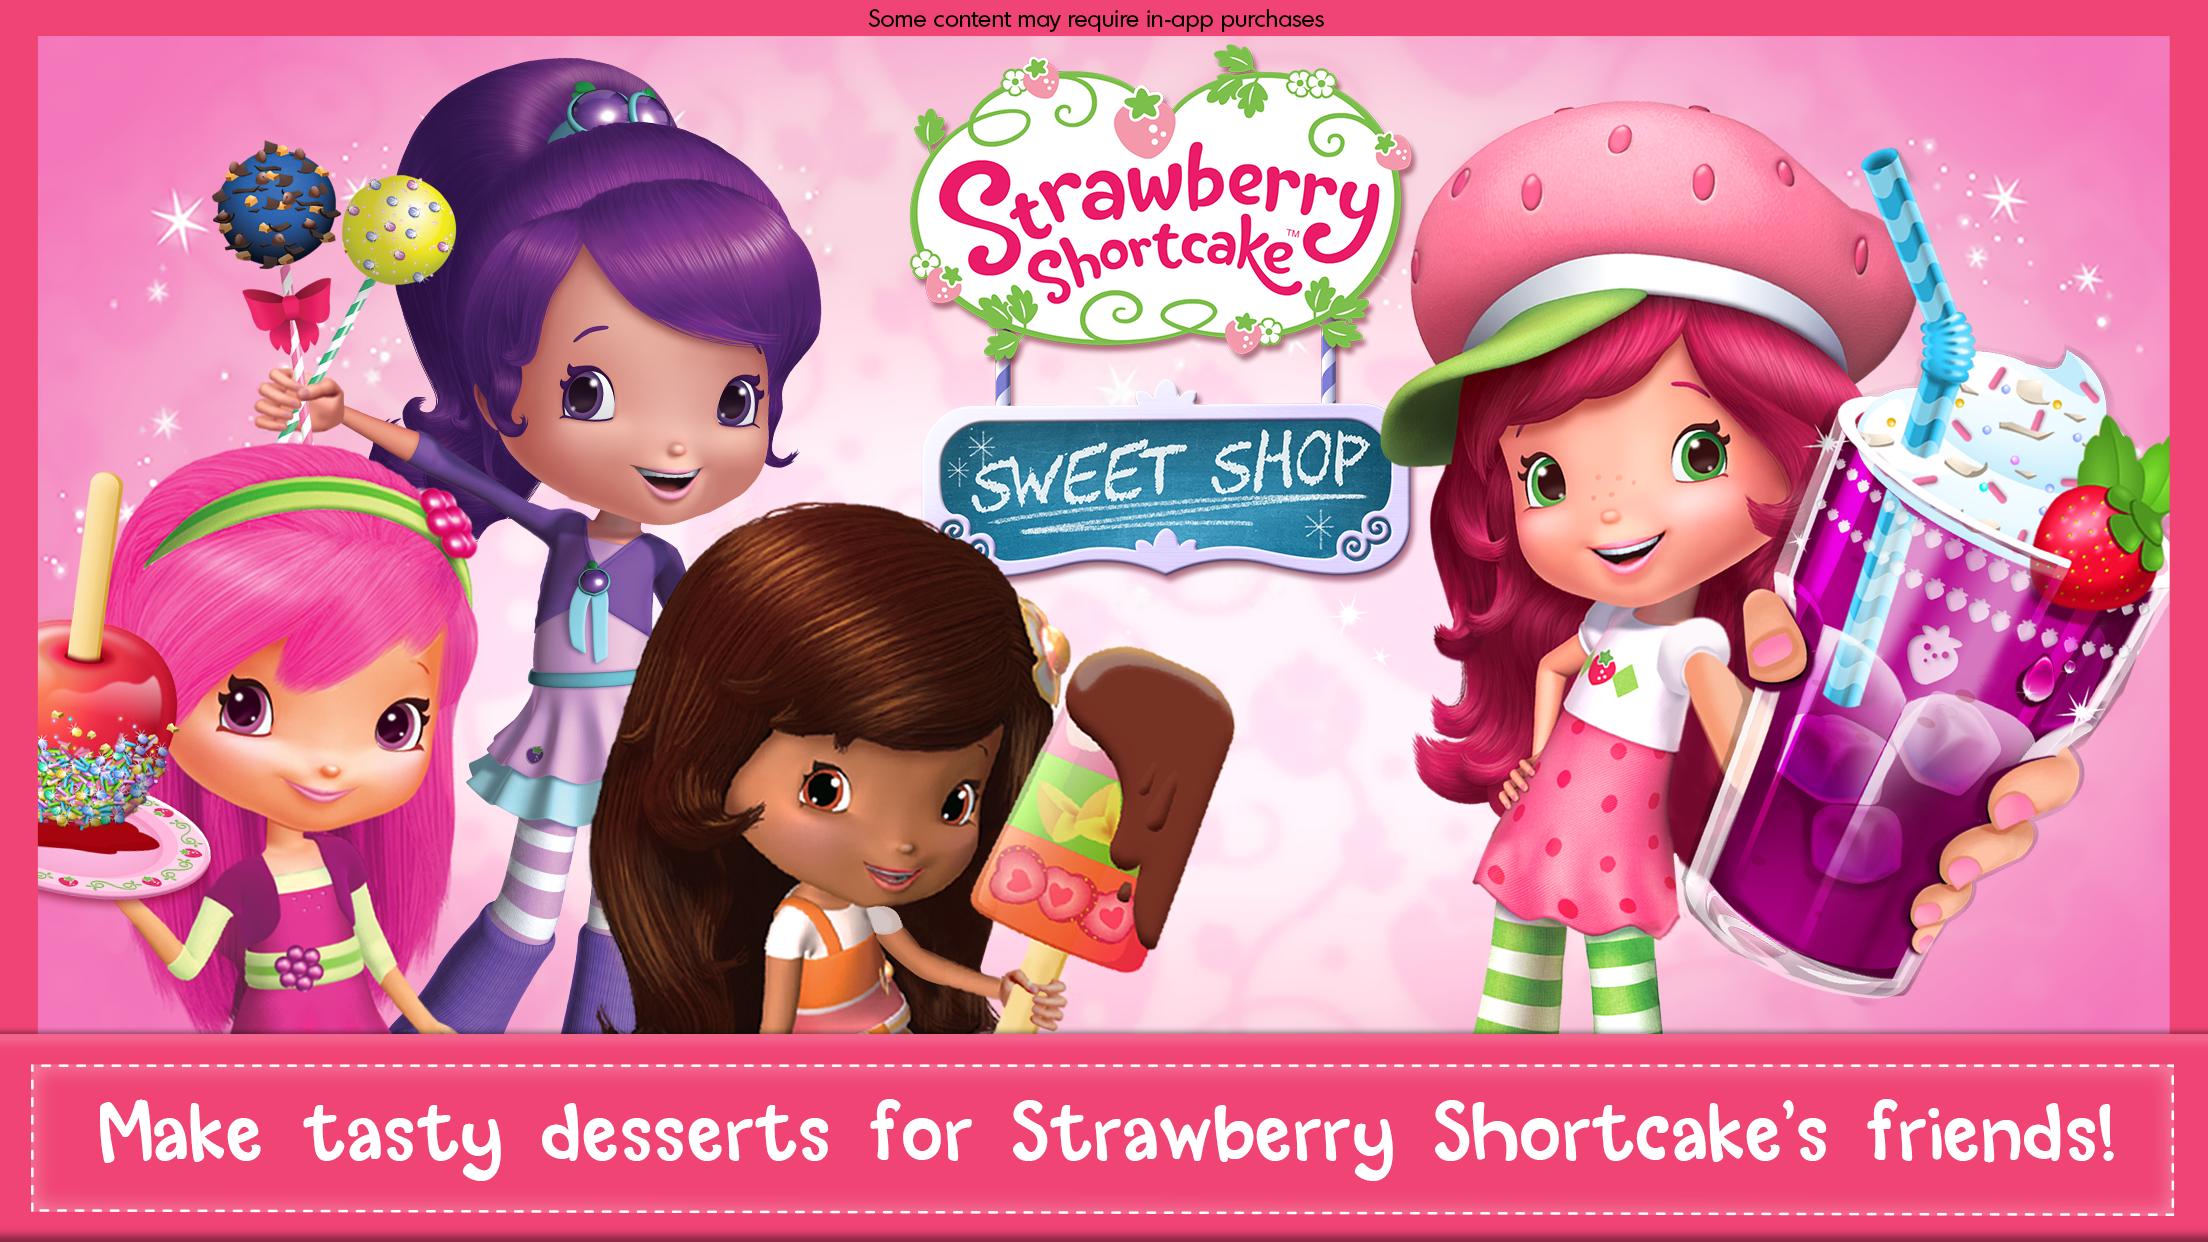 Top 12 Strawberry Shortcake Games for Your Strawberry Shortcake Theme Party!